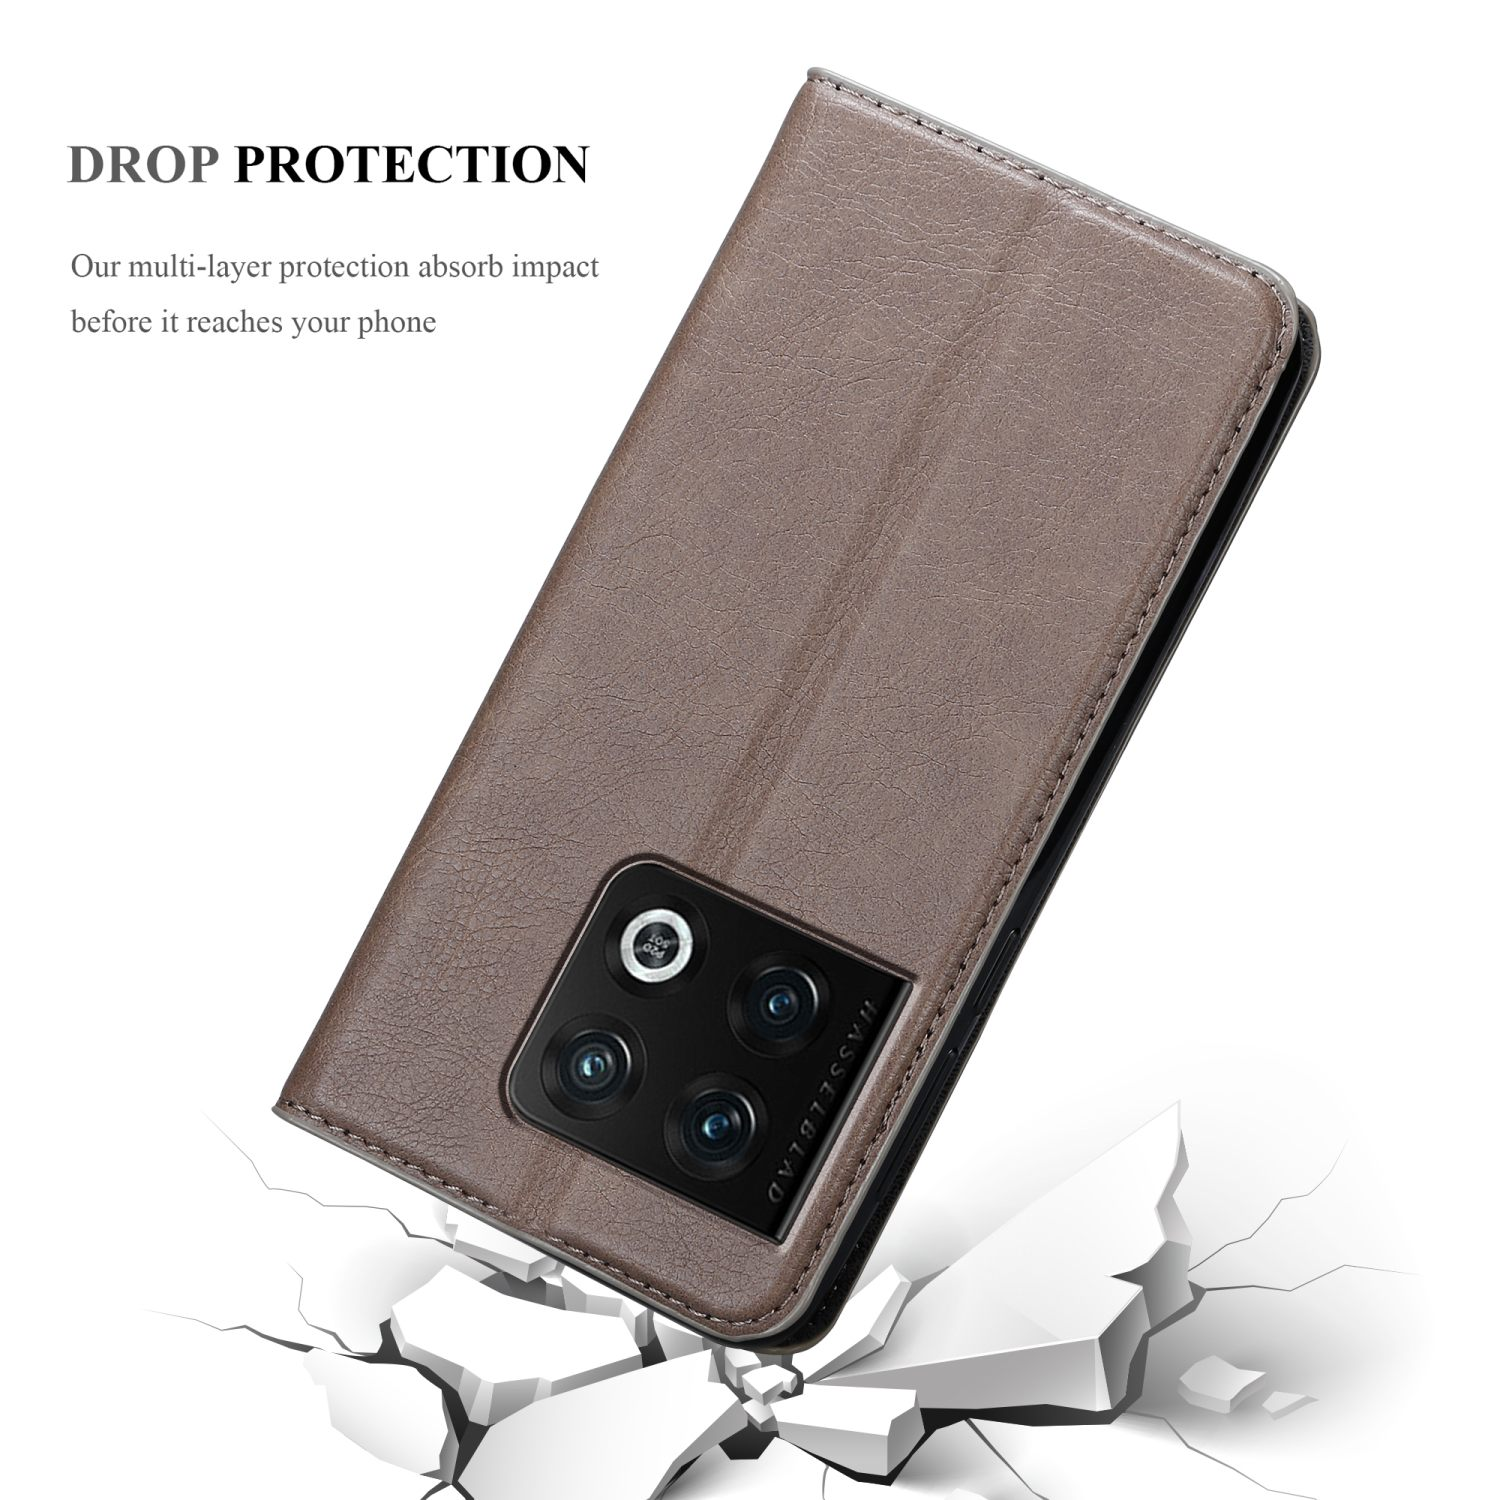 CADORABO Book 10 PRO KAFFEE Invisible BRAUN OnePlus, Hülle 5G, Bookcover, Magnet